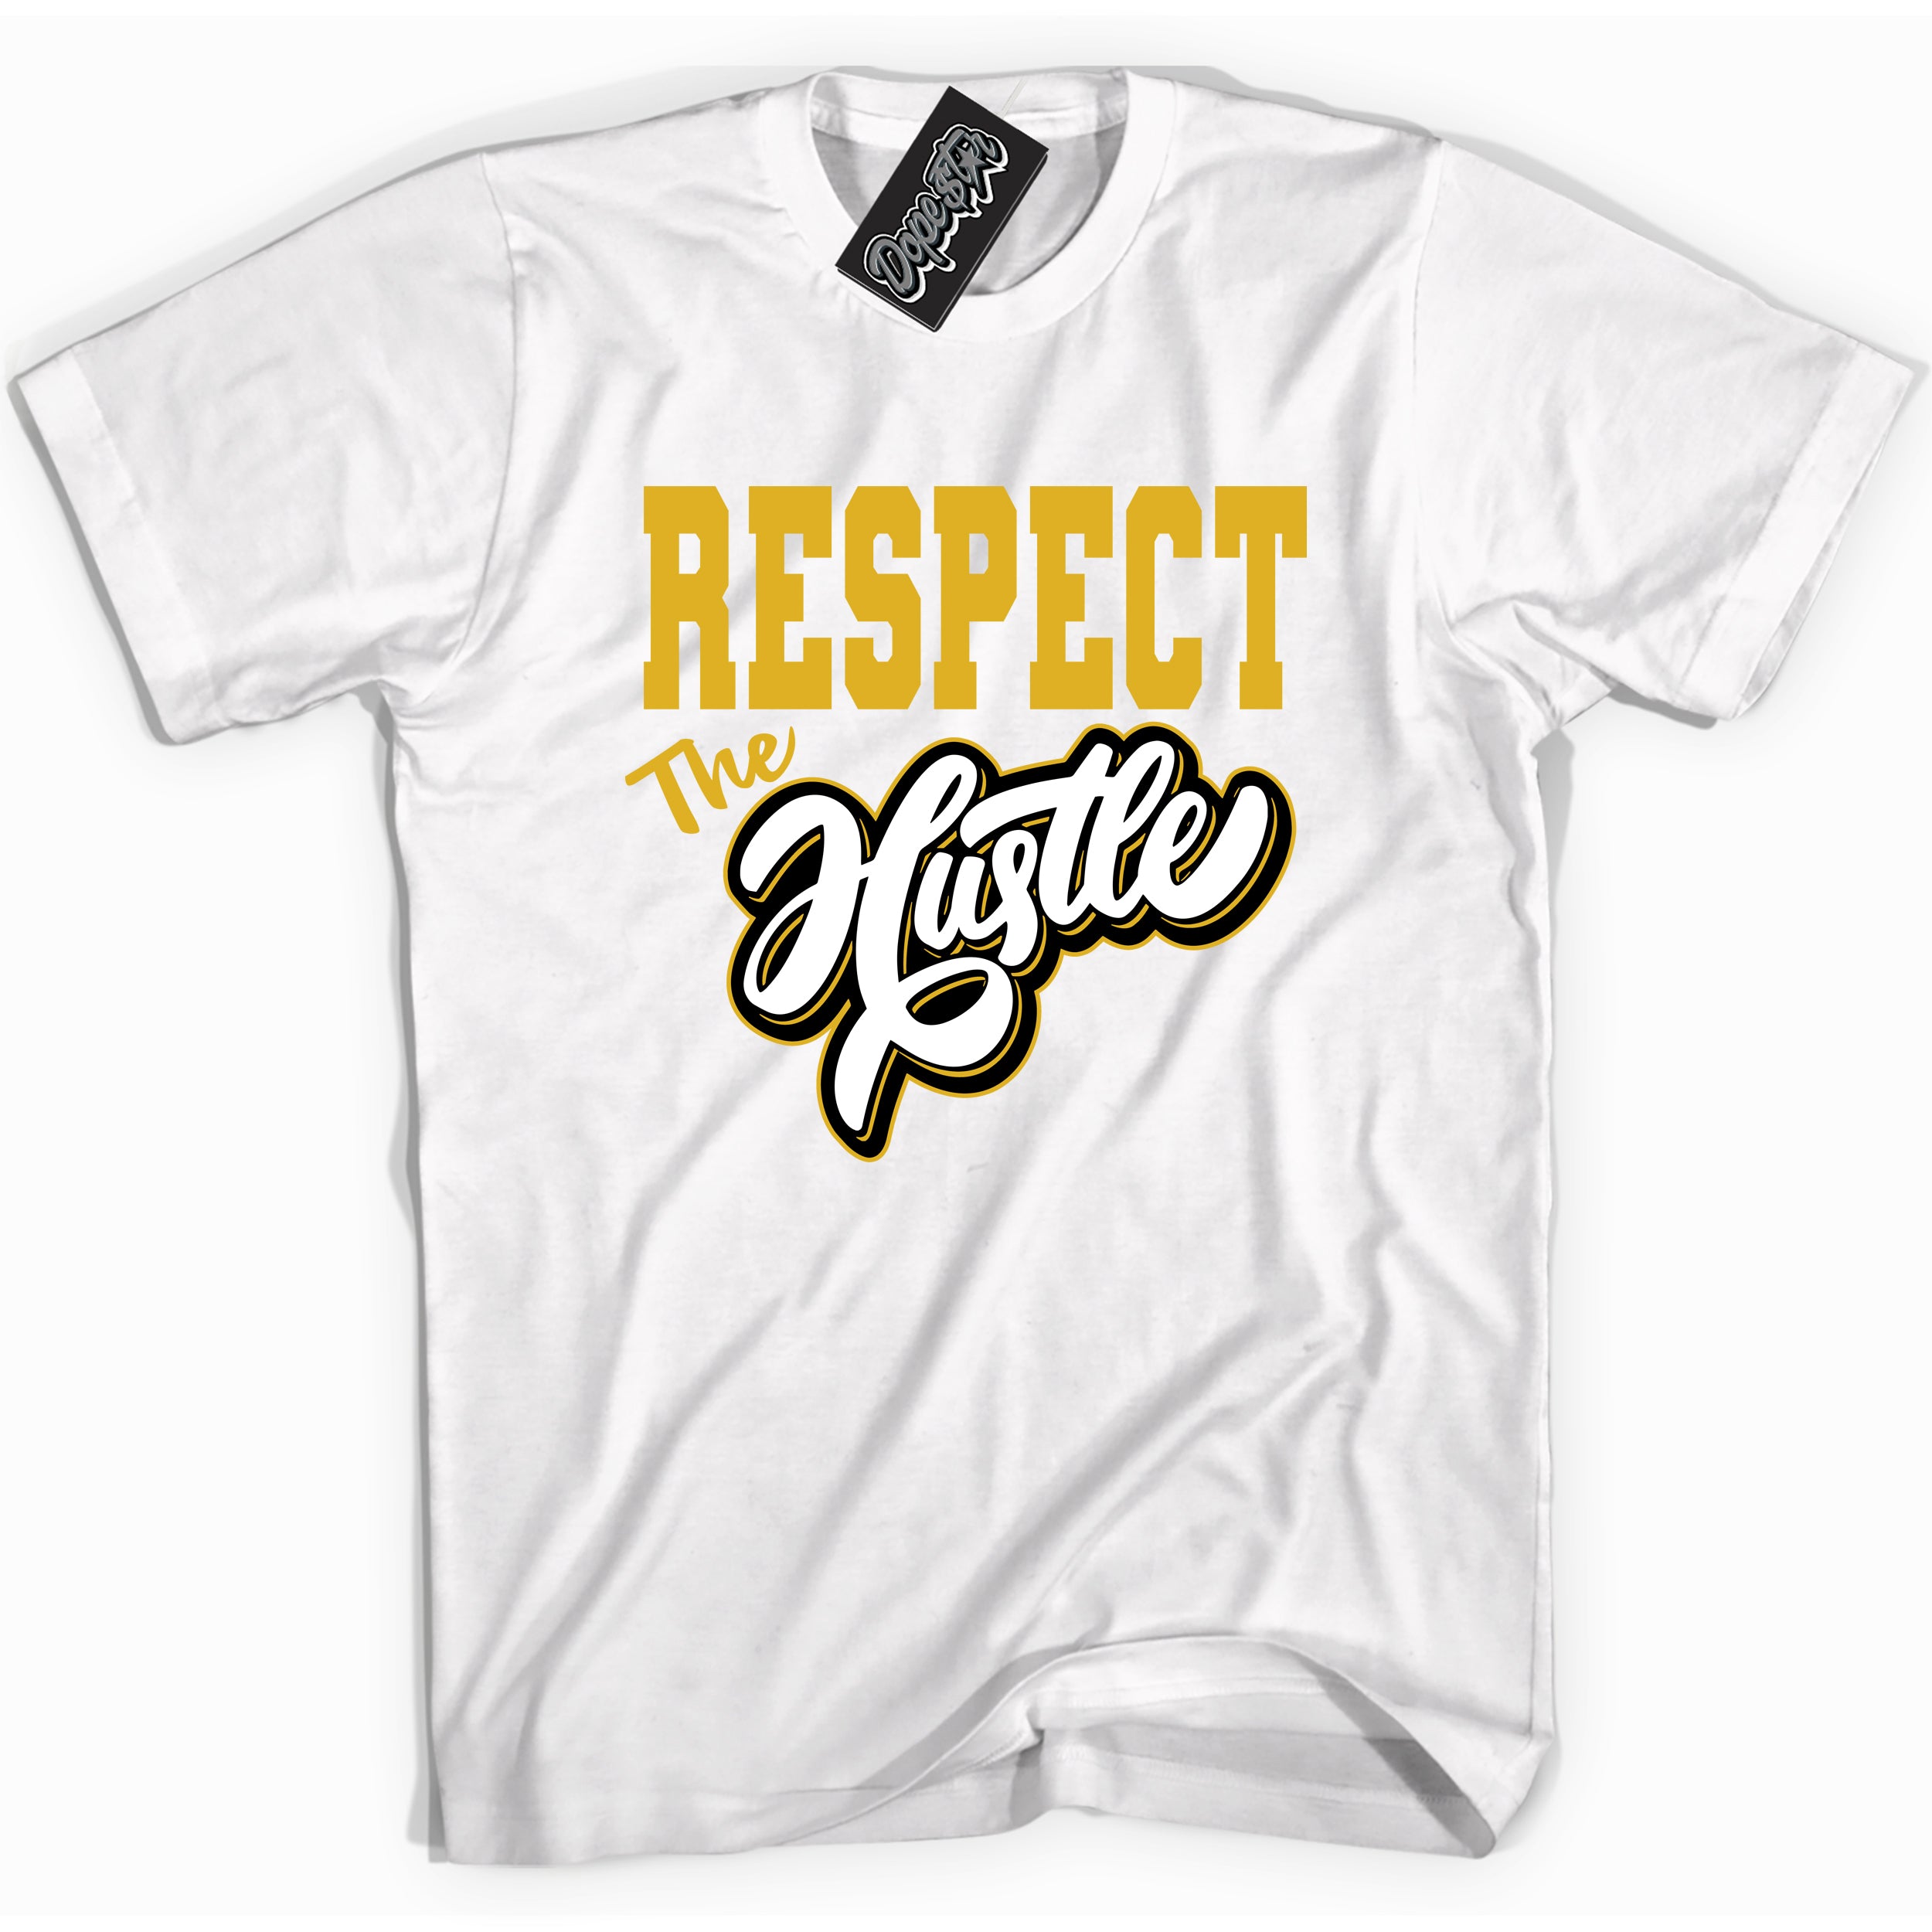 Cool white Shirt with “ Respect The Hustle ” design that perfectly matches Yellow Ochre 6s Sneakers.